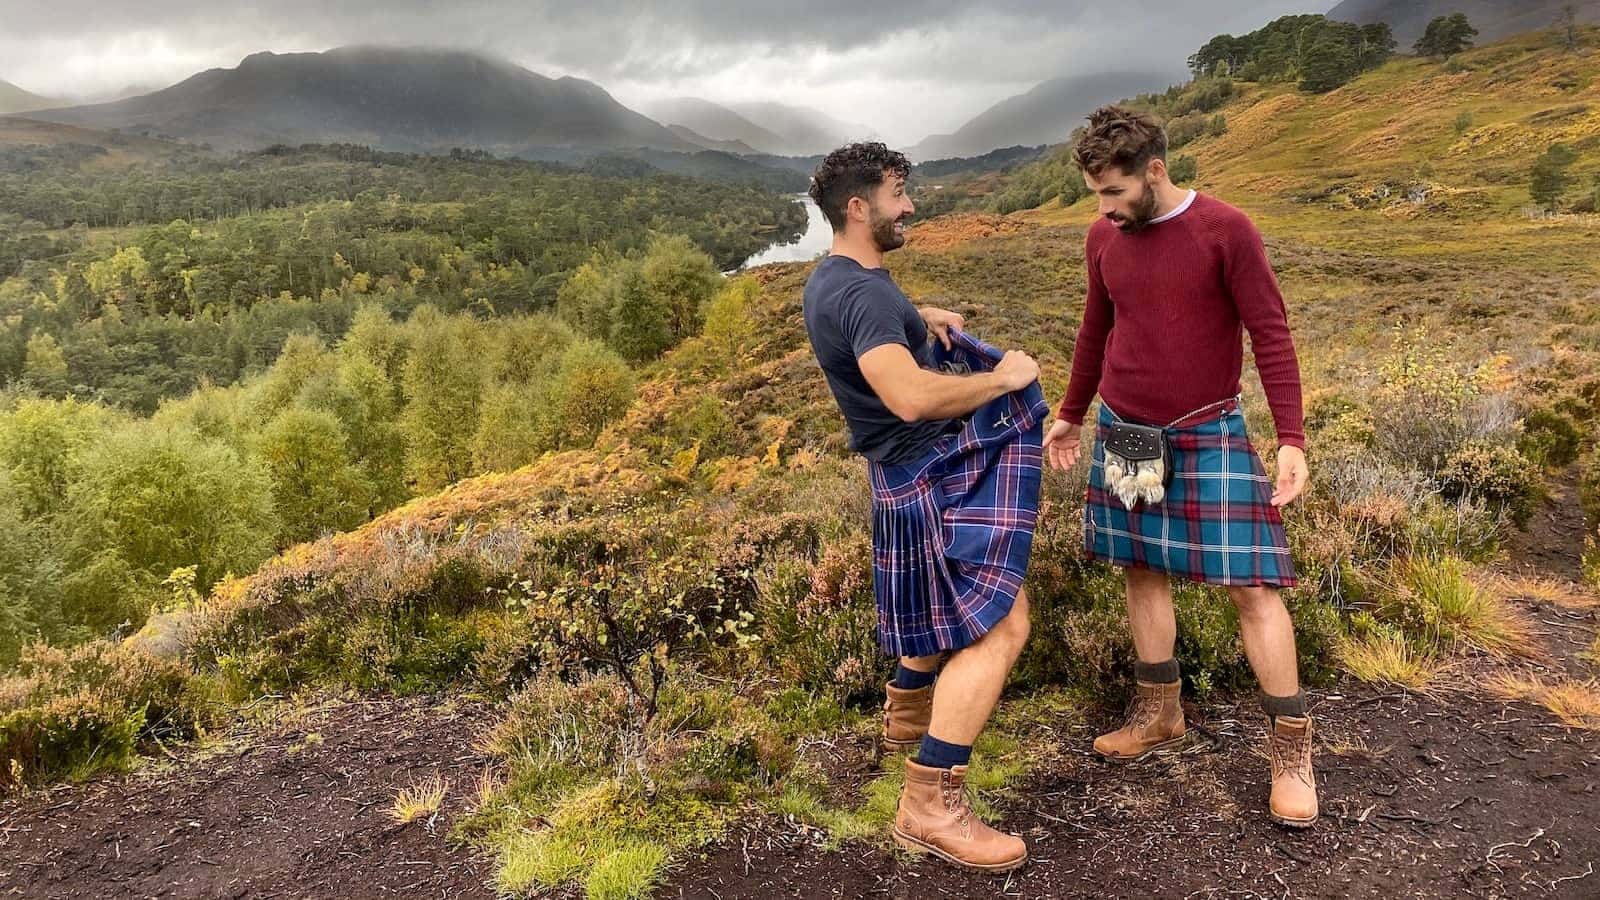 Stefan showing Seby what he has on under his kilt!